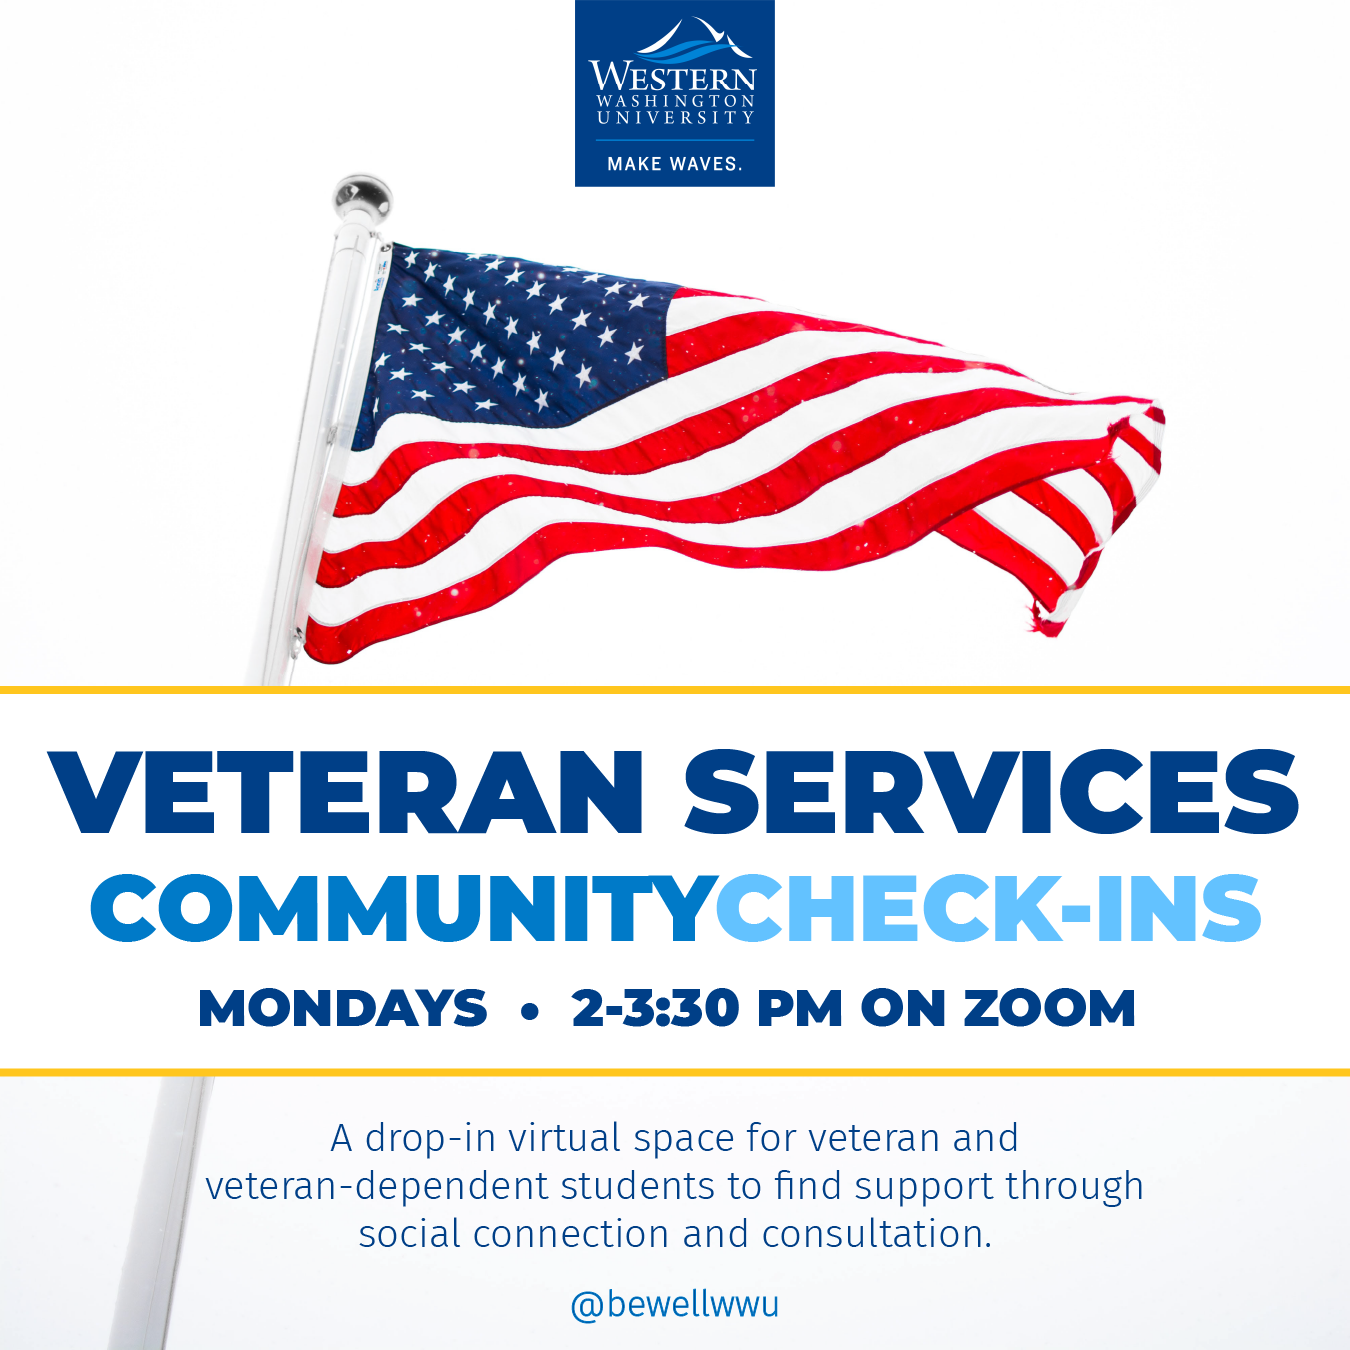 American flag with text "Veteran Services Community Check-Ins"